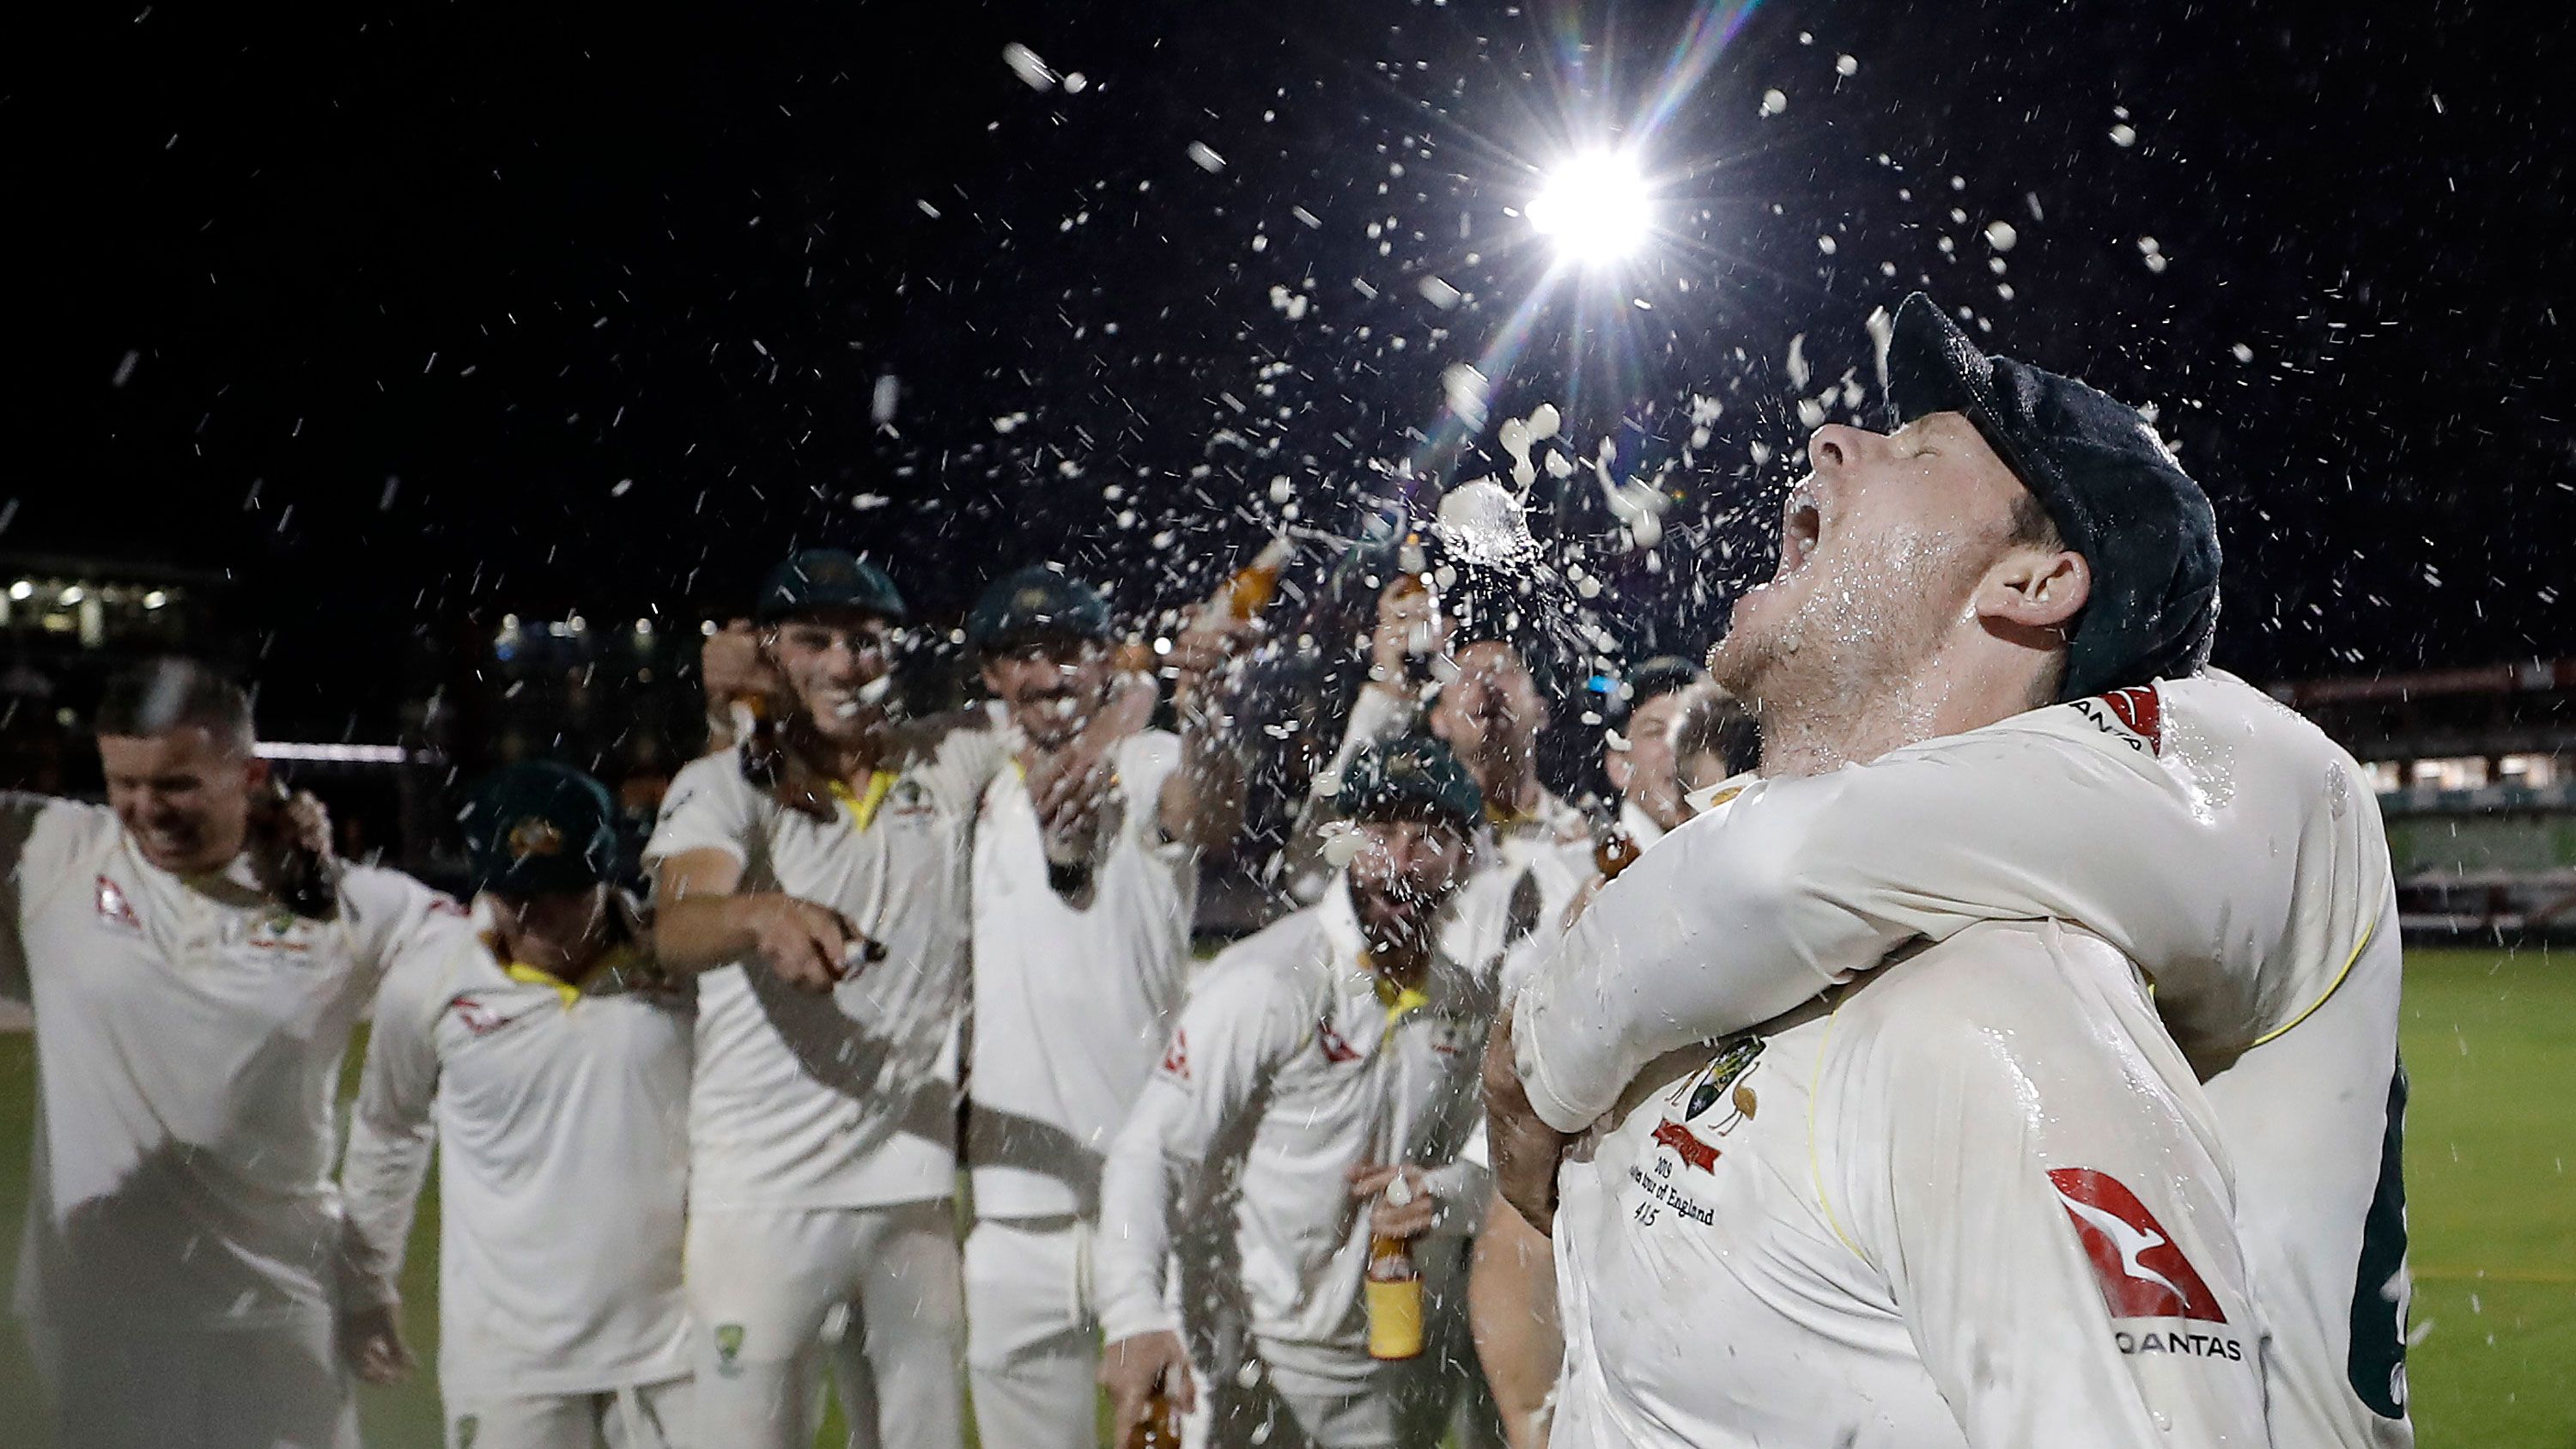 Steve Smith celebrates with his teammates while singing the team song on the pitch following victory in the fourth Test.